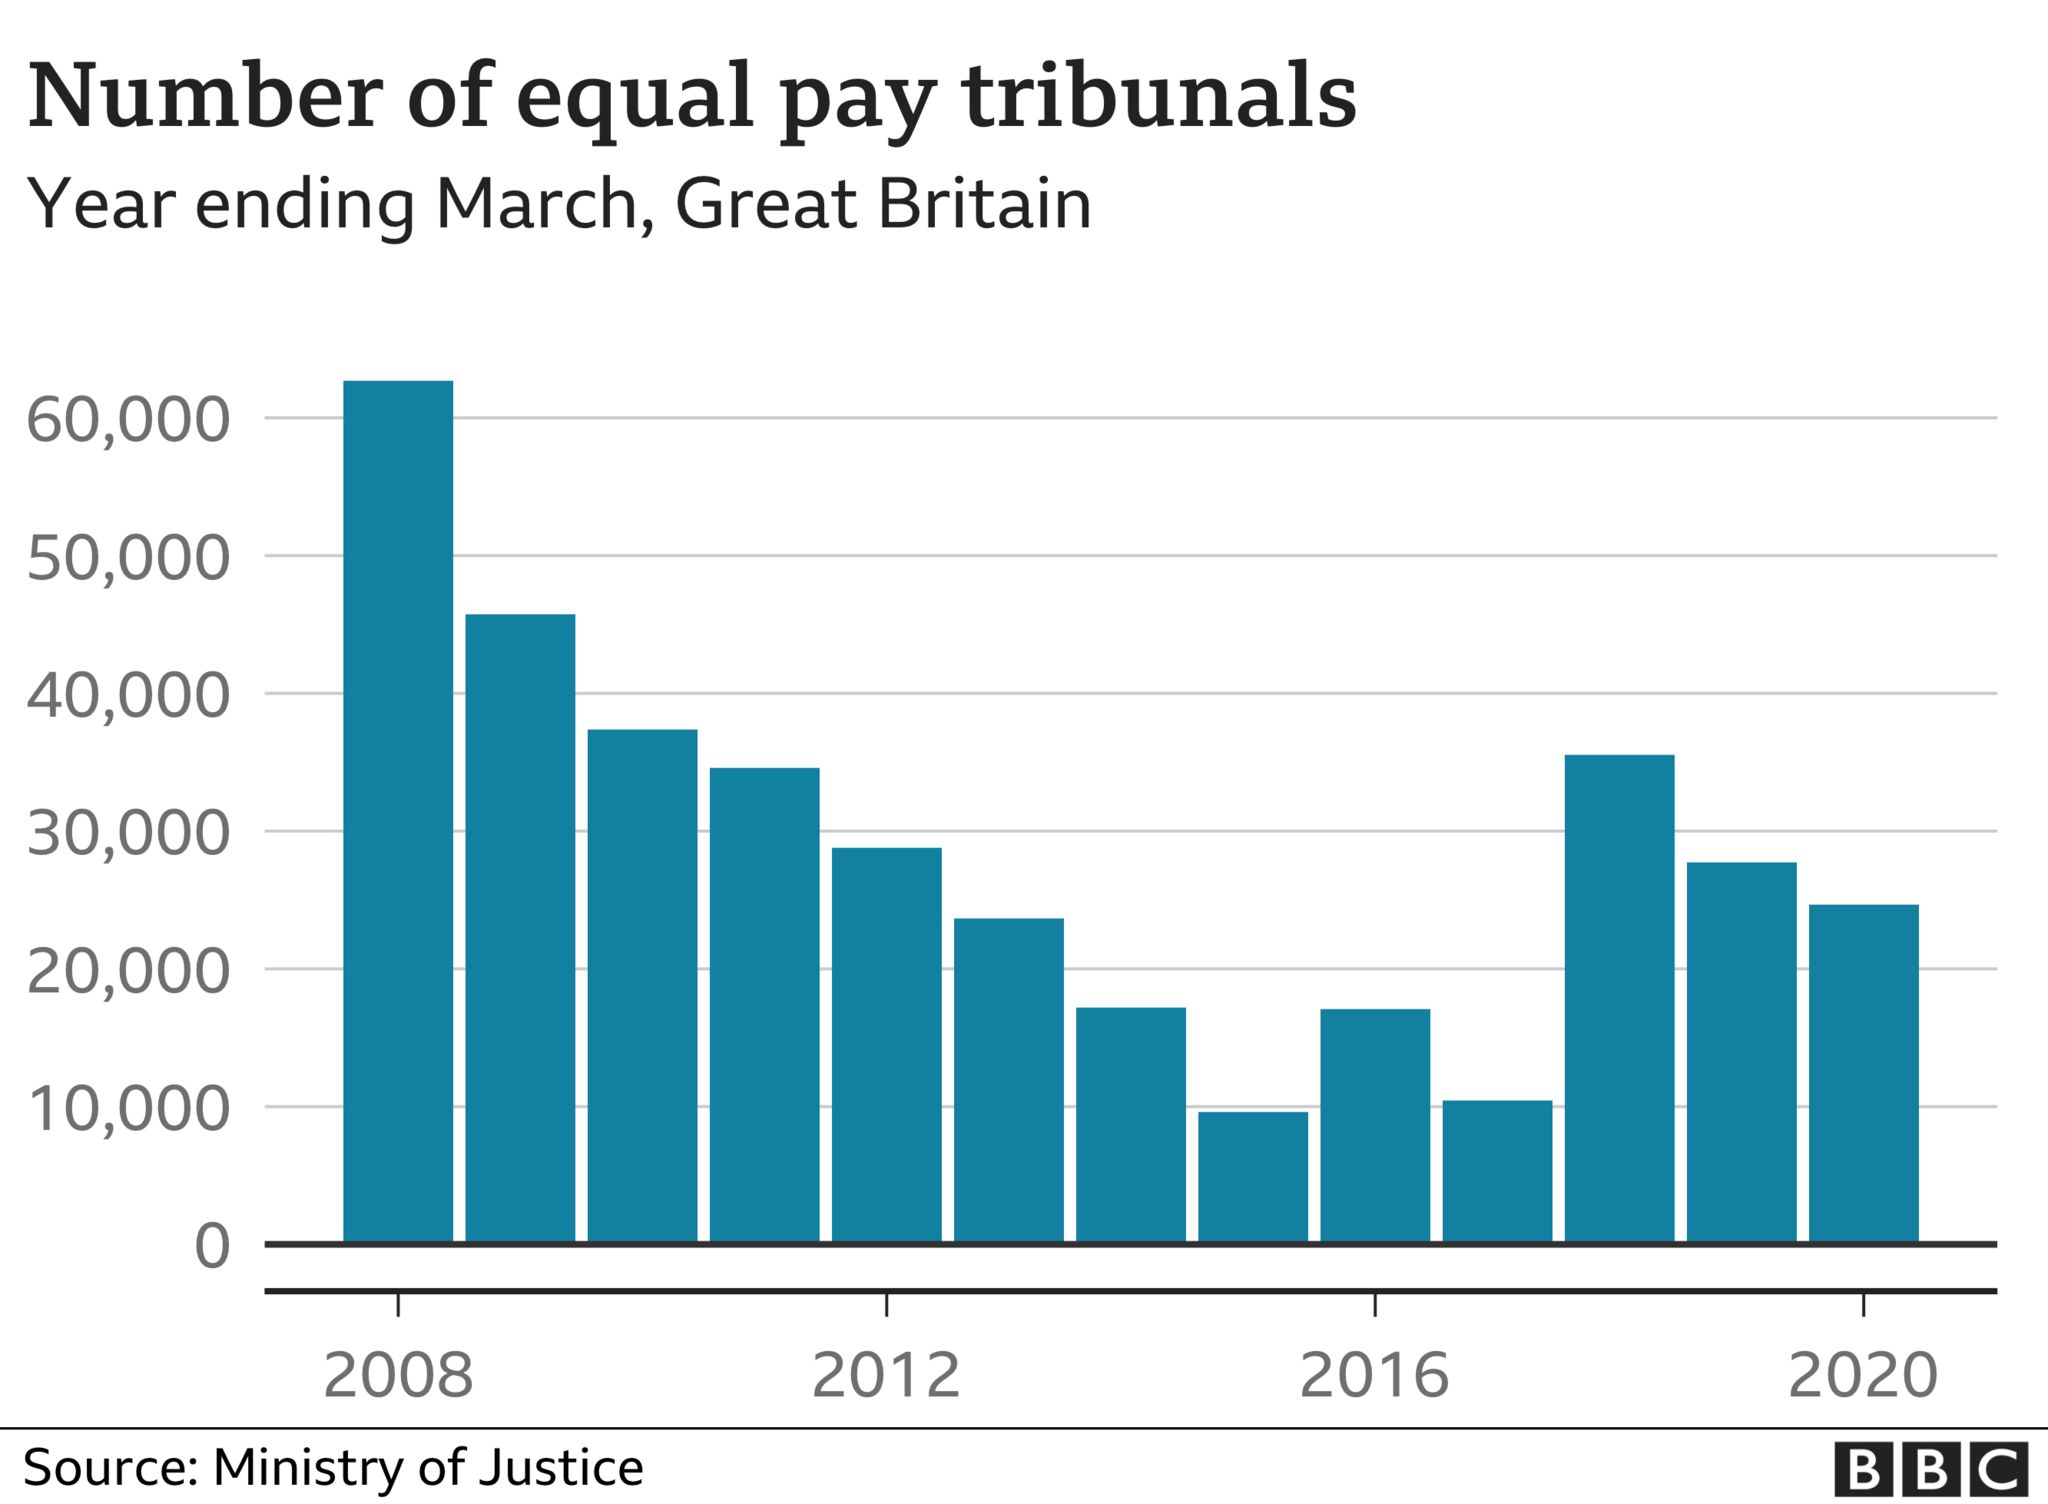 Number of equal pay tribunals bar chart